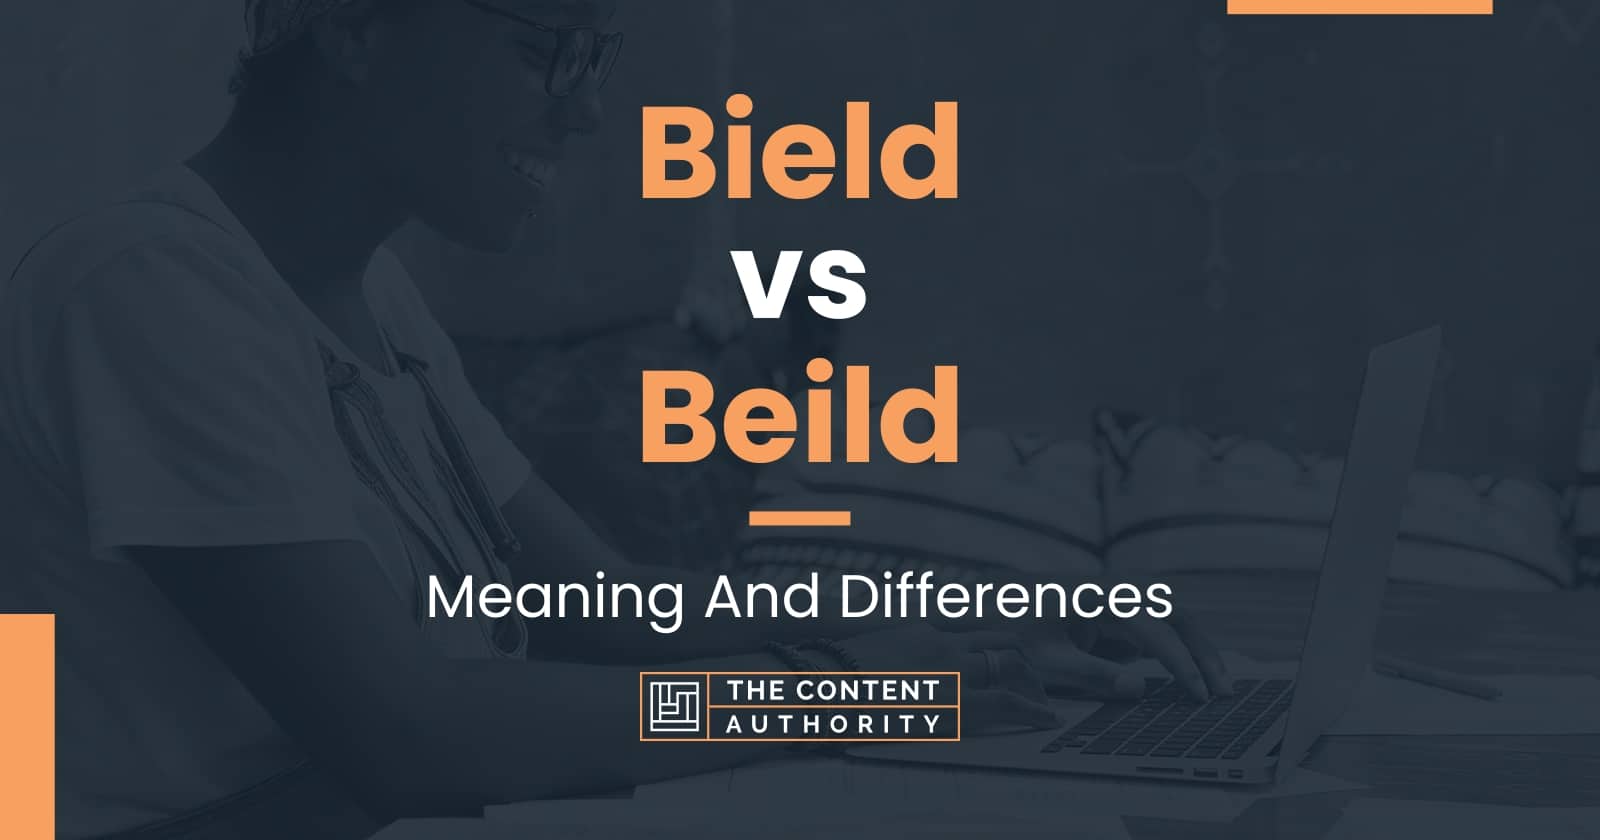 Bield vs Beild: Meaning And Differences